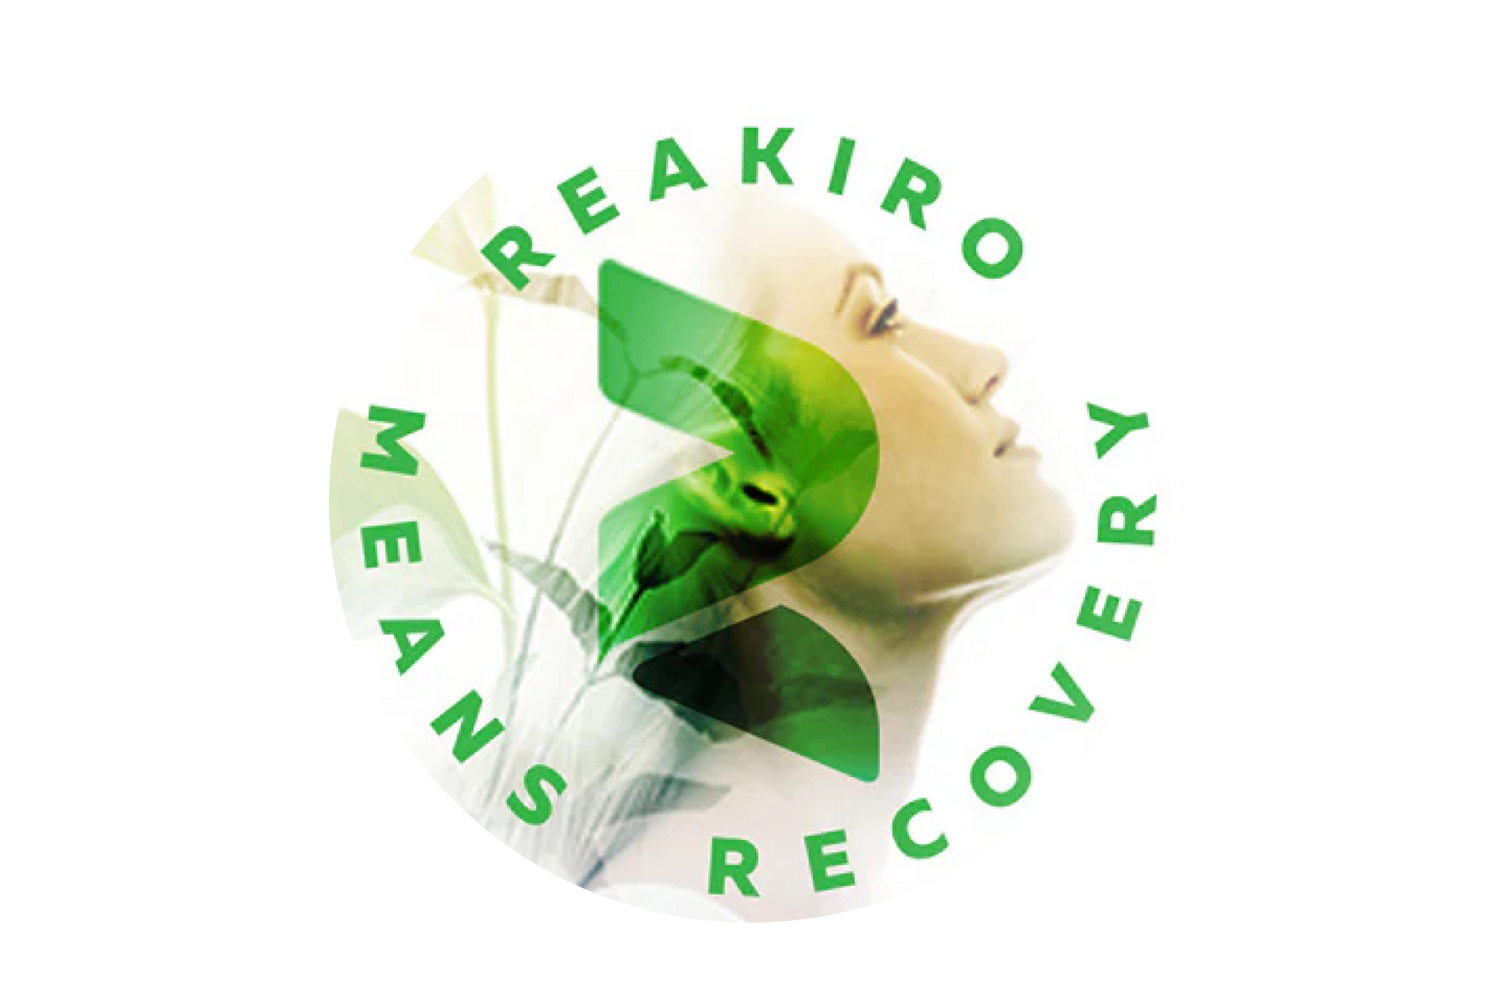 Reakiro means recovery